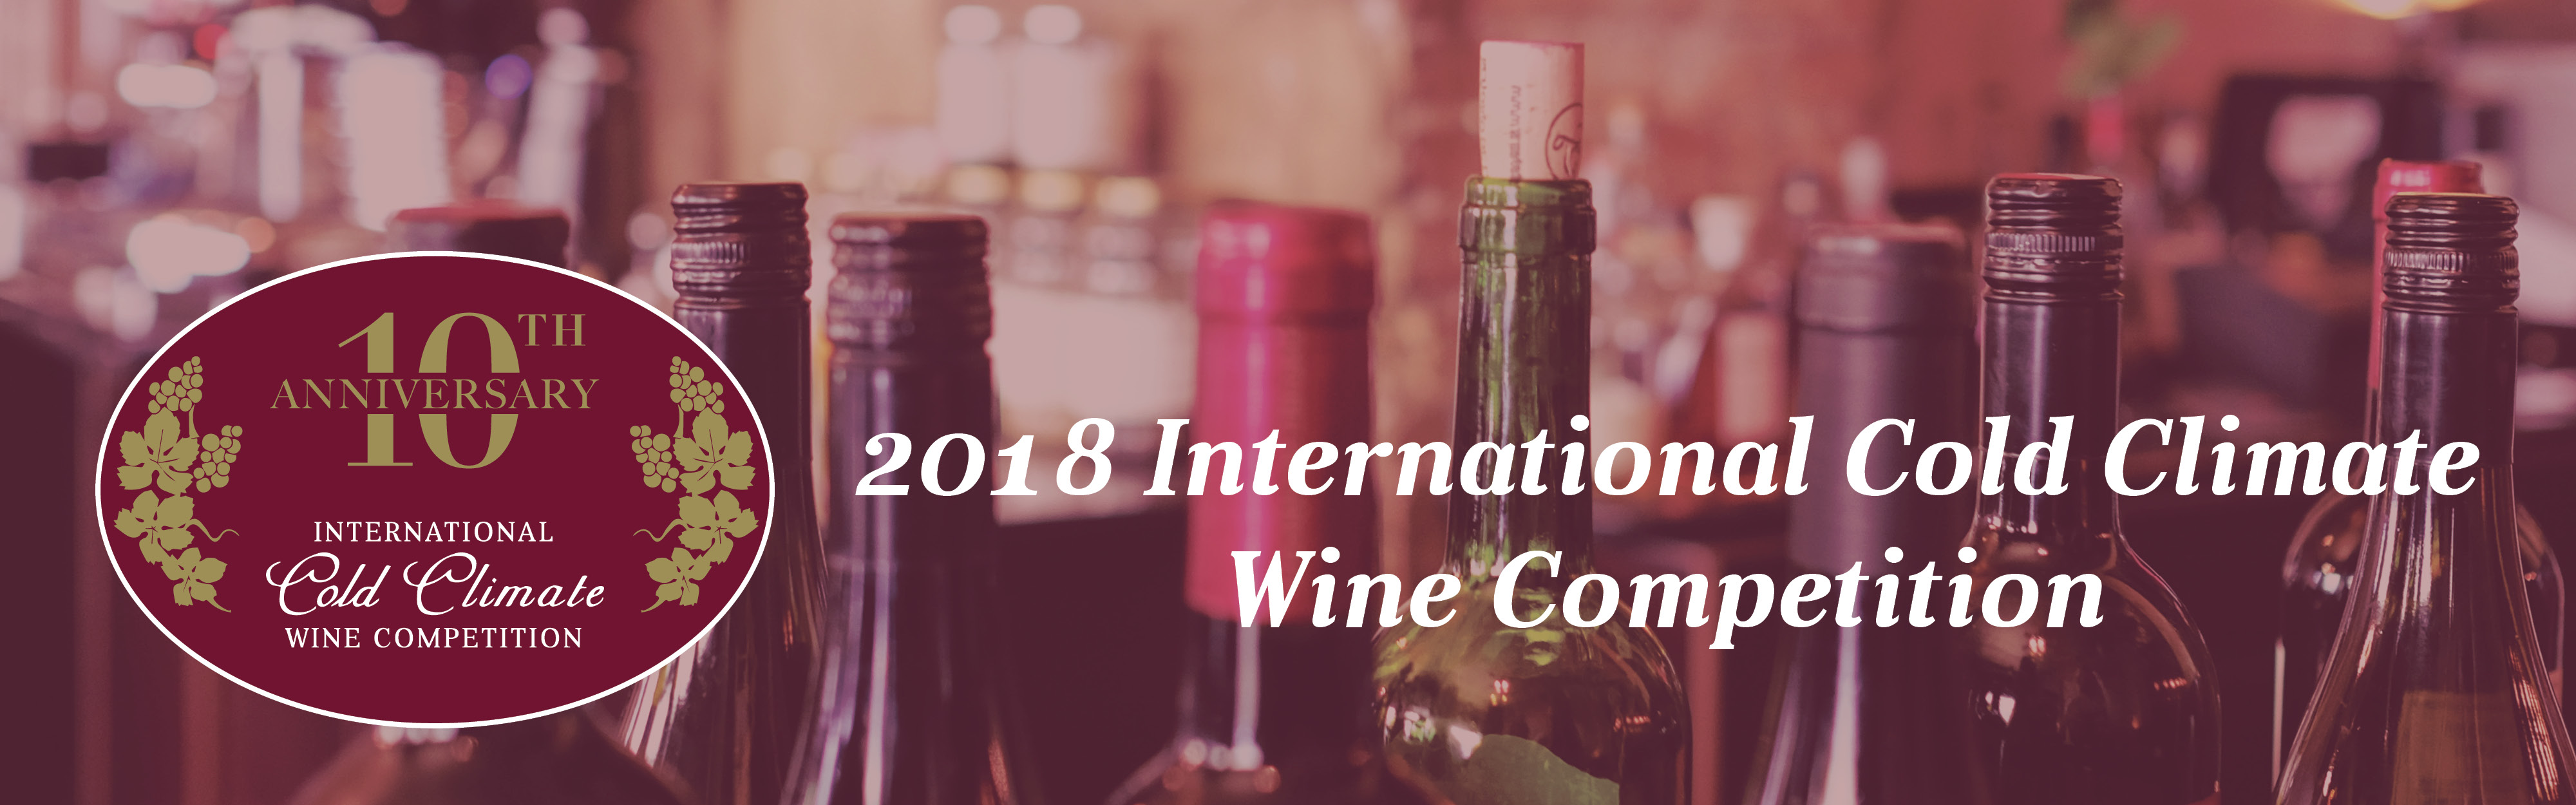 10th Anniversary International Cold Climate Wine Competition